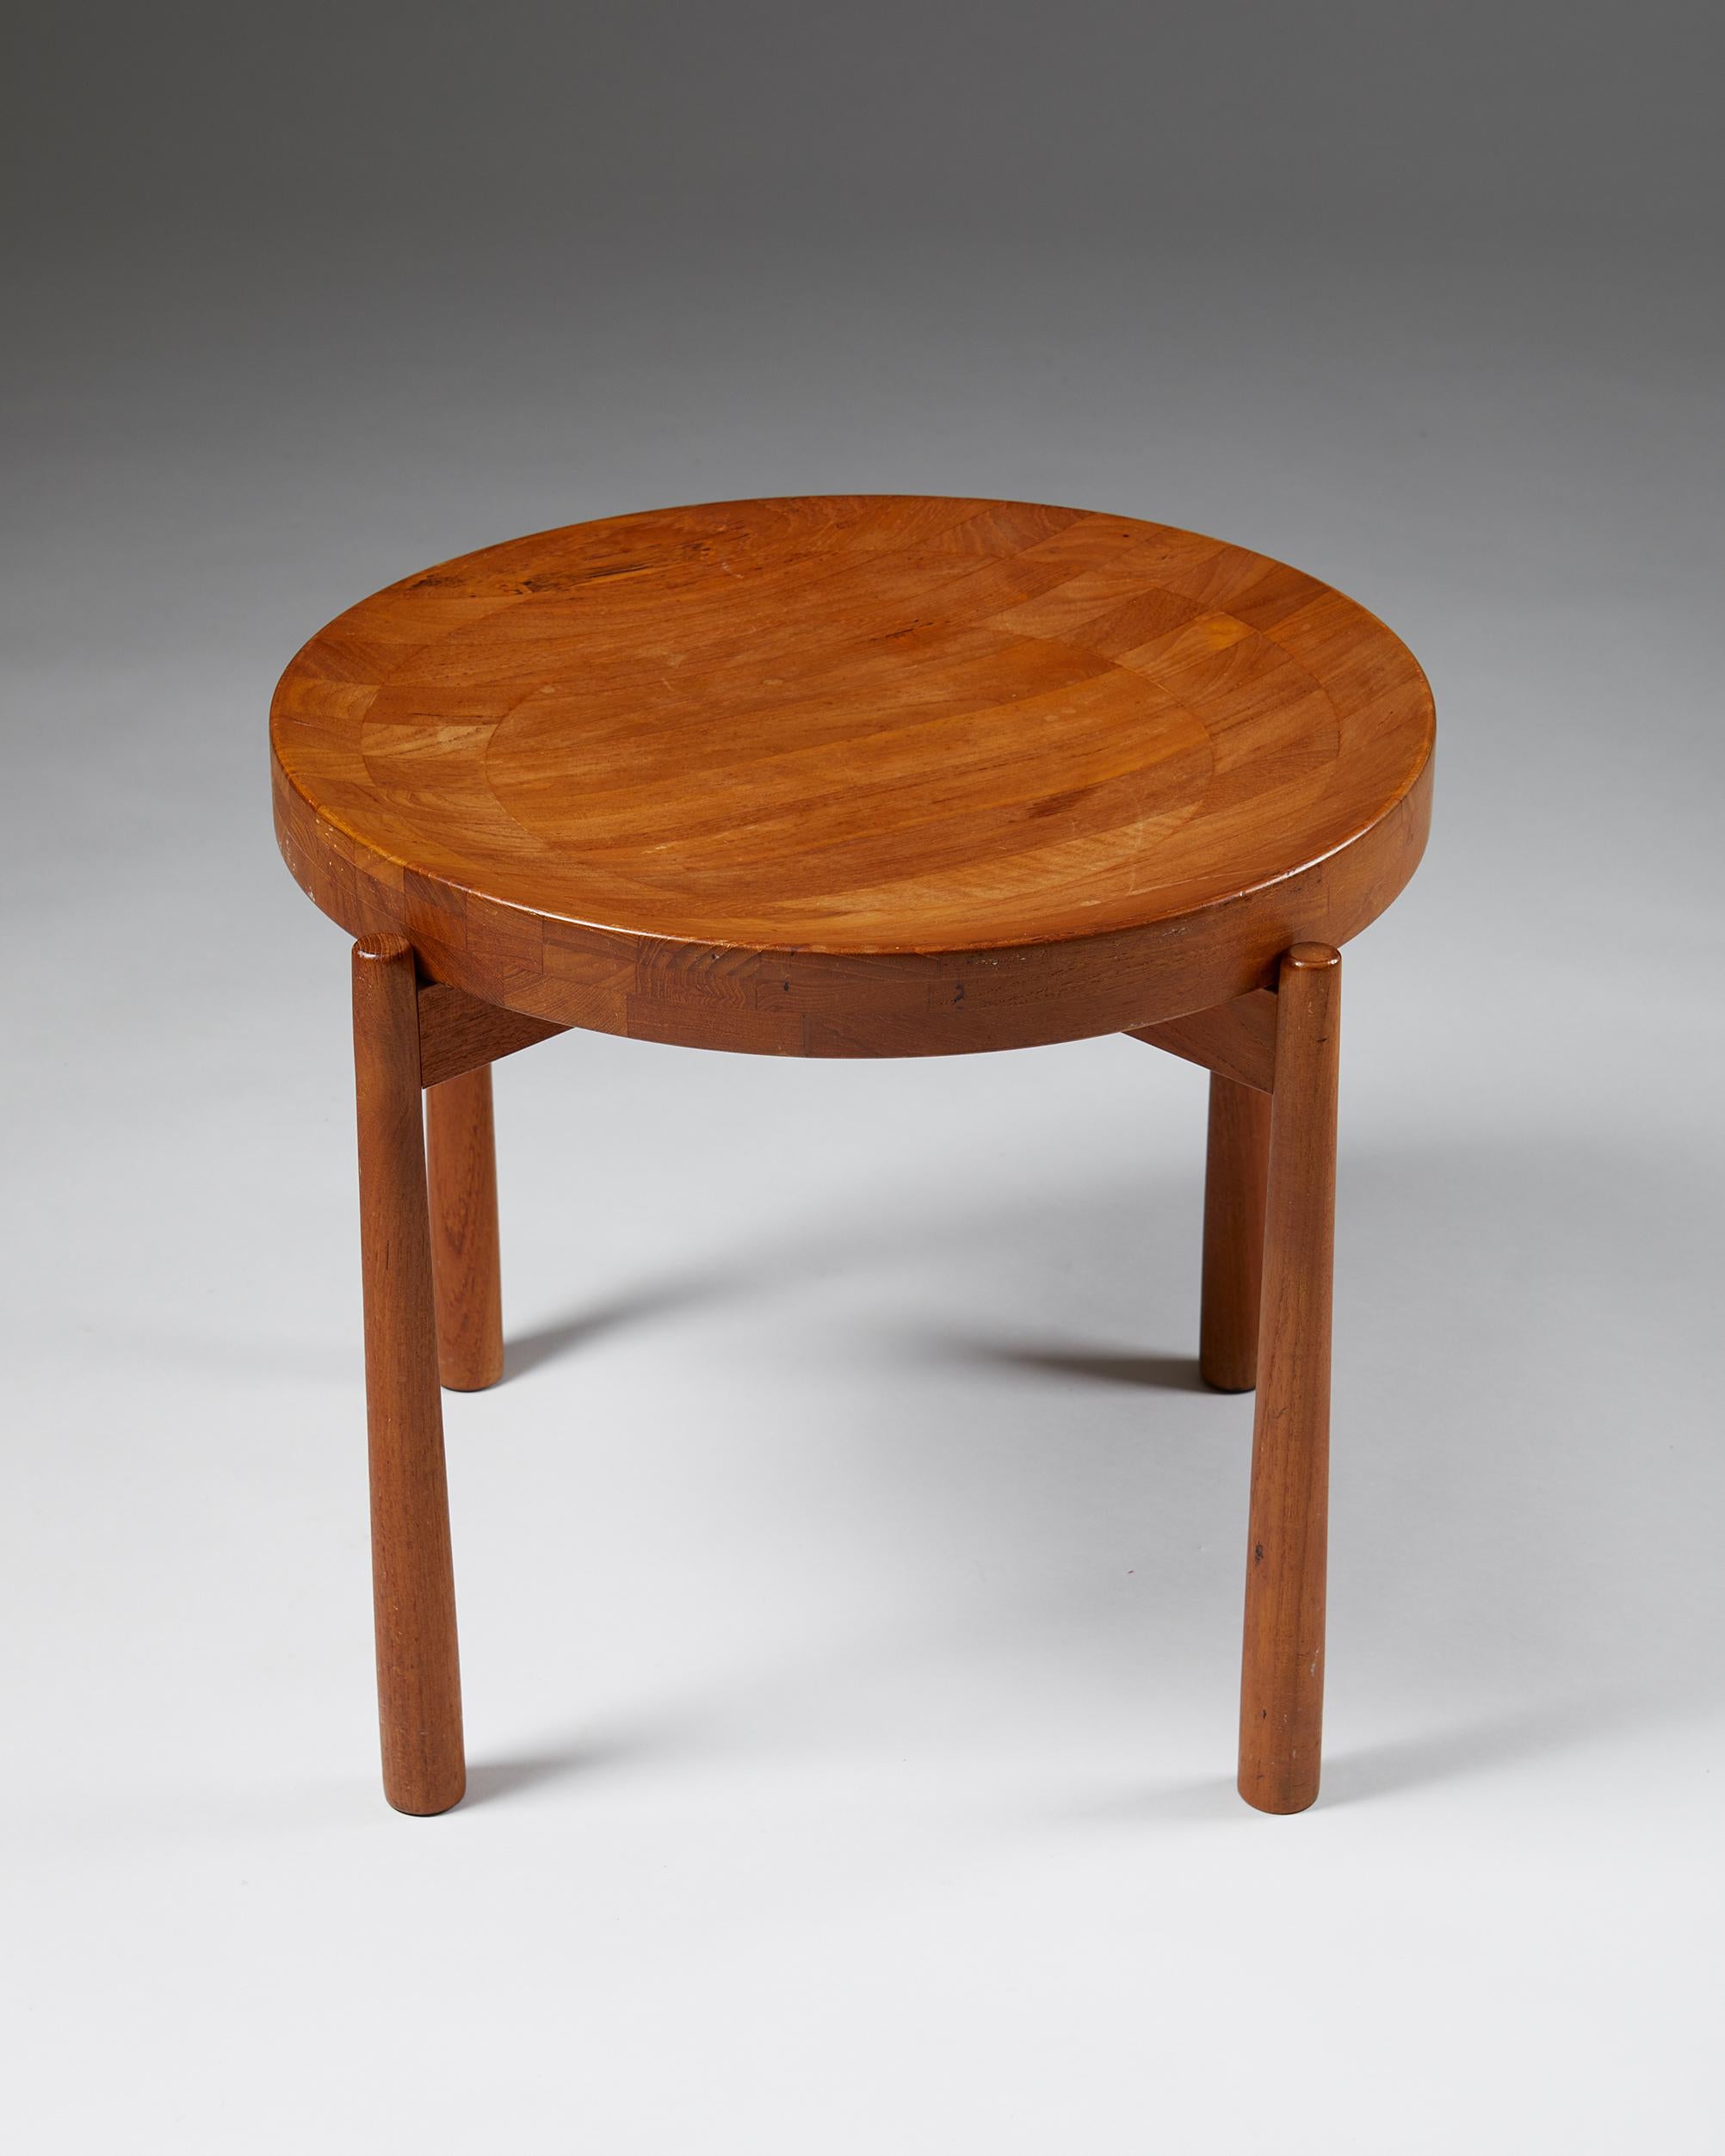 20th Century Side Table Designed by Jens Harald Quistgaard, Denmark, 1950s